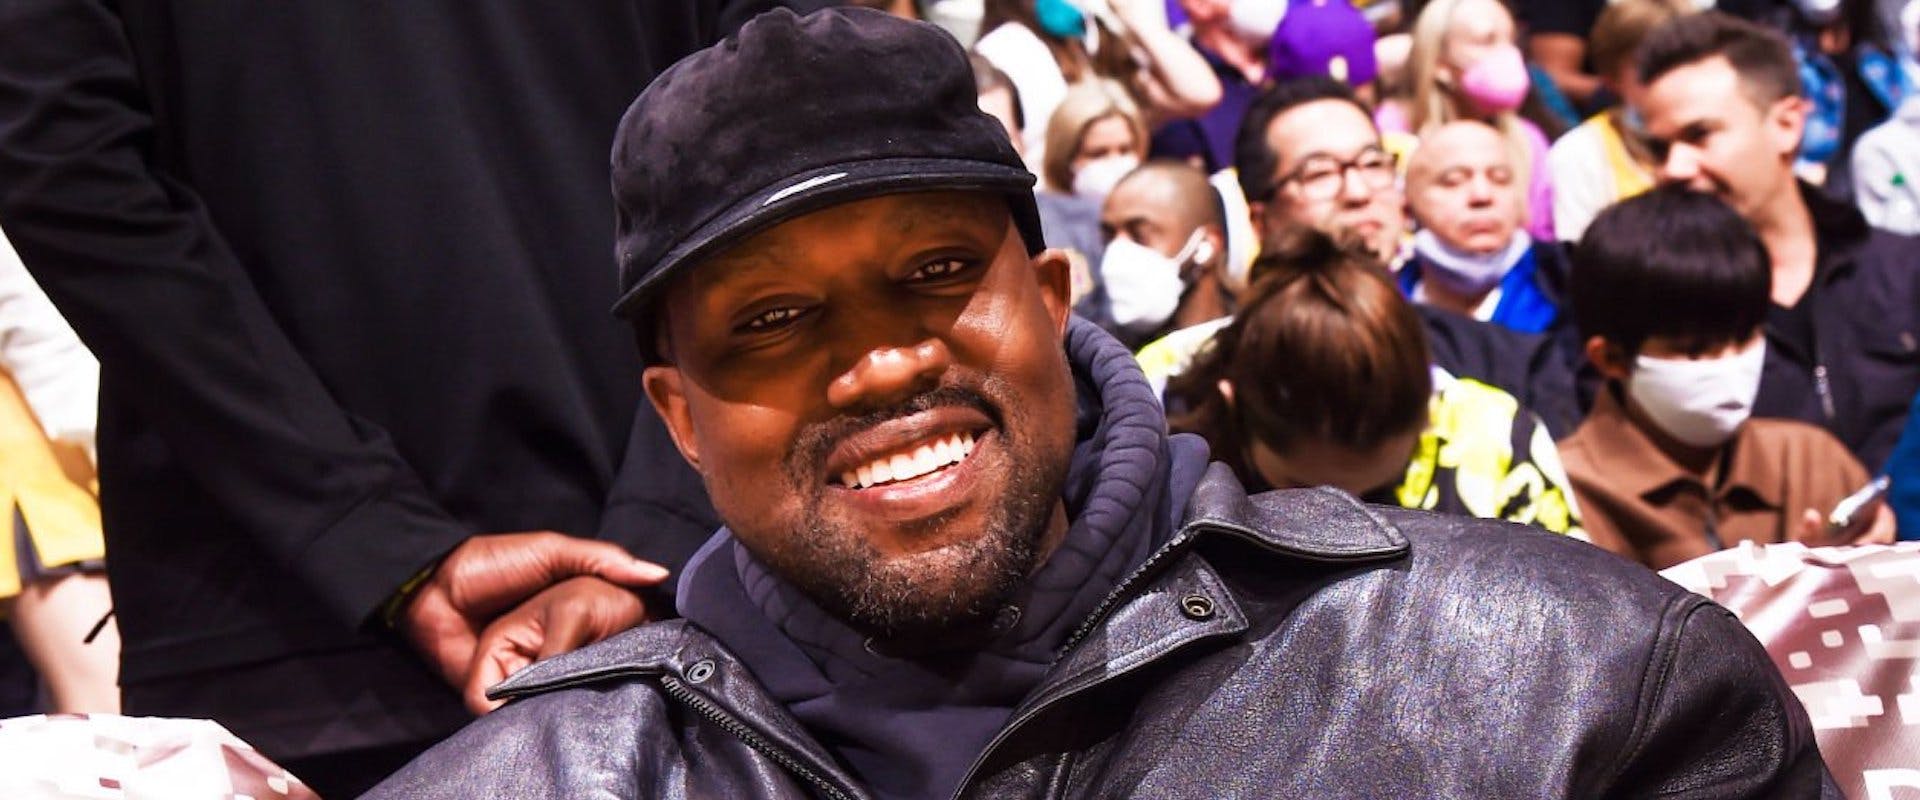 Rapper, Kanye West attends a game between the Sacramento Kings and Los Angeles Lakers on November 26, 2021 at STAPLES Center in Los Angeles, California.